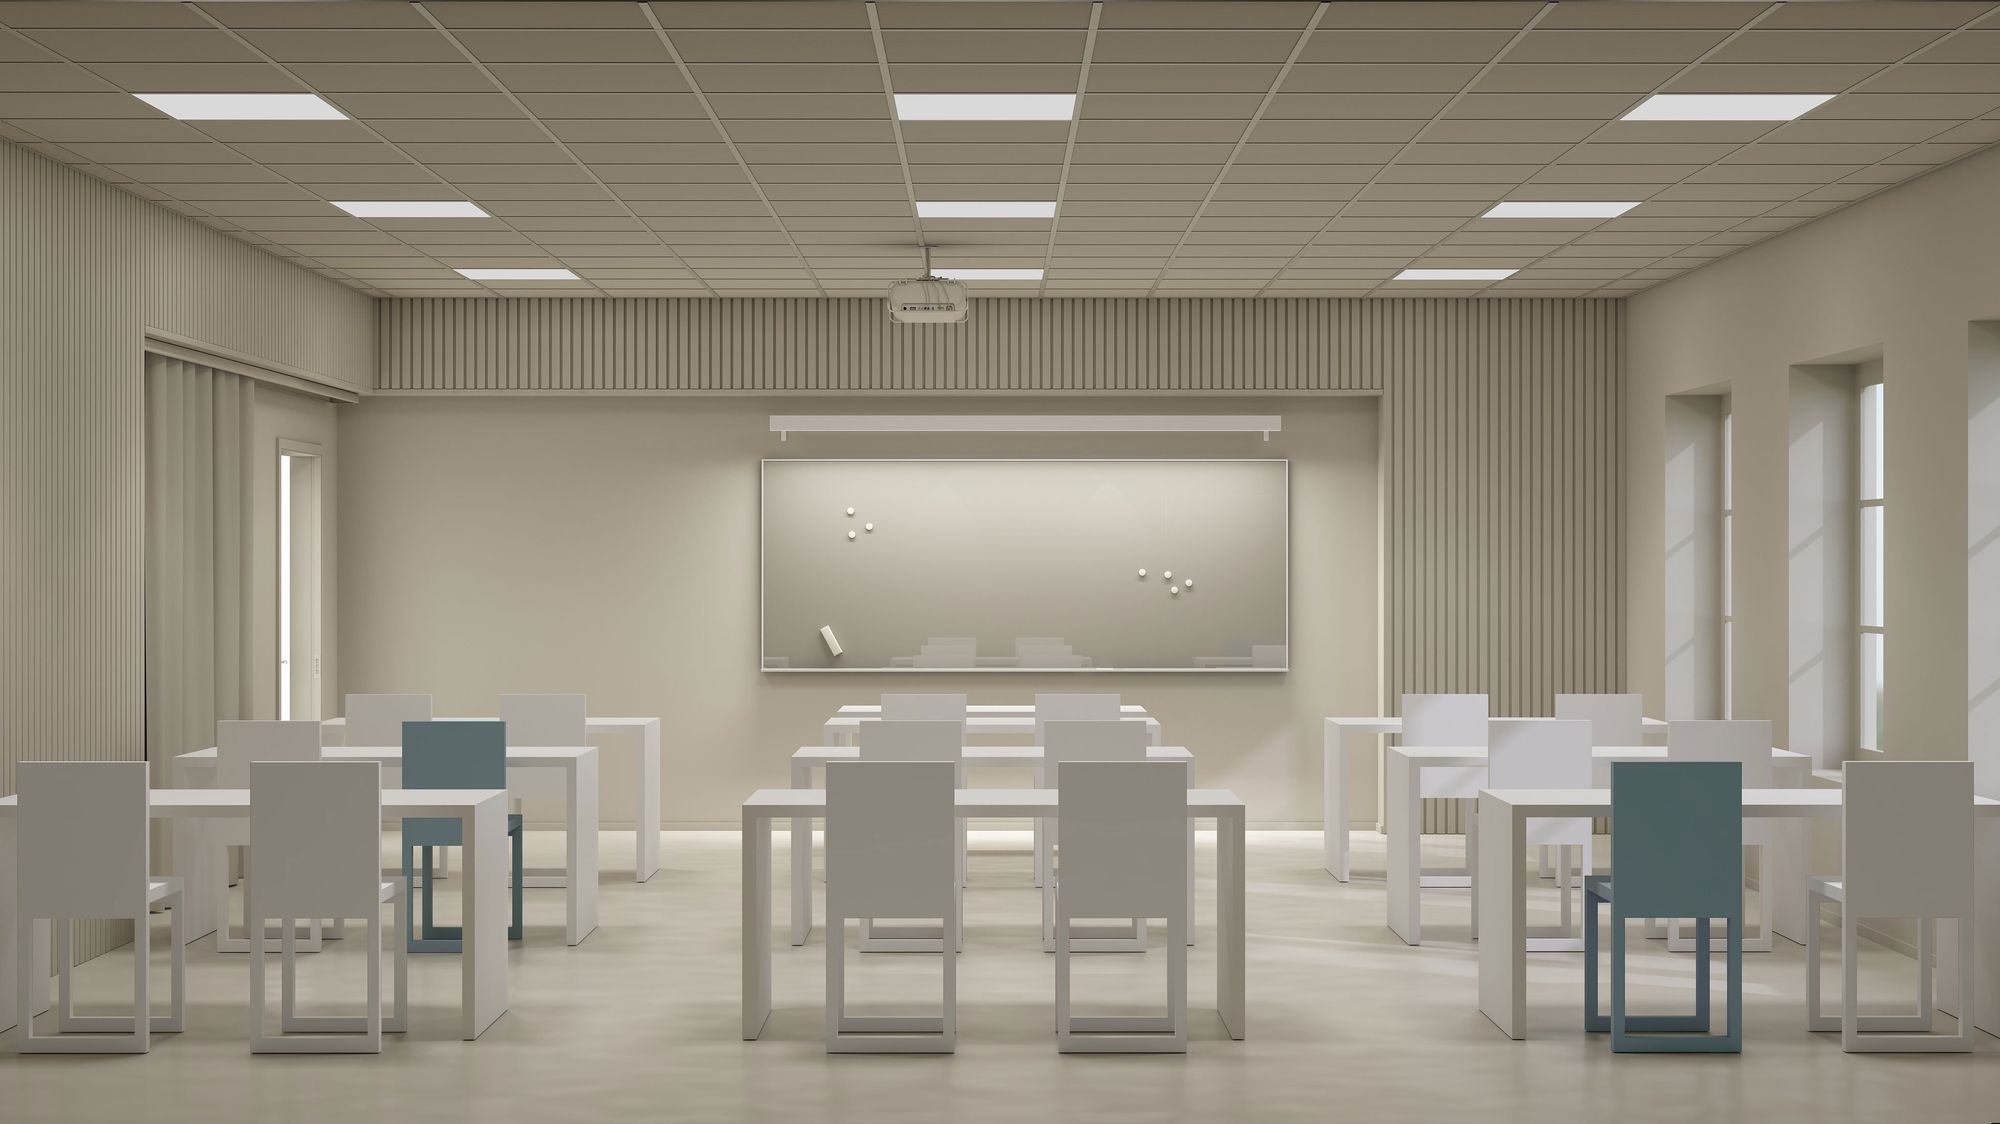 Classrooms with recessed lighting